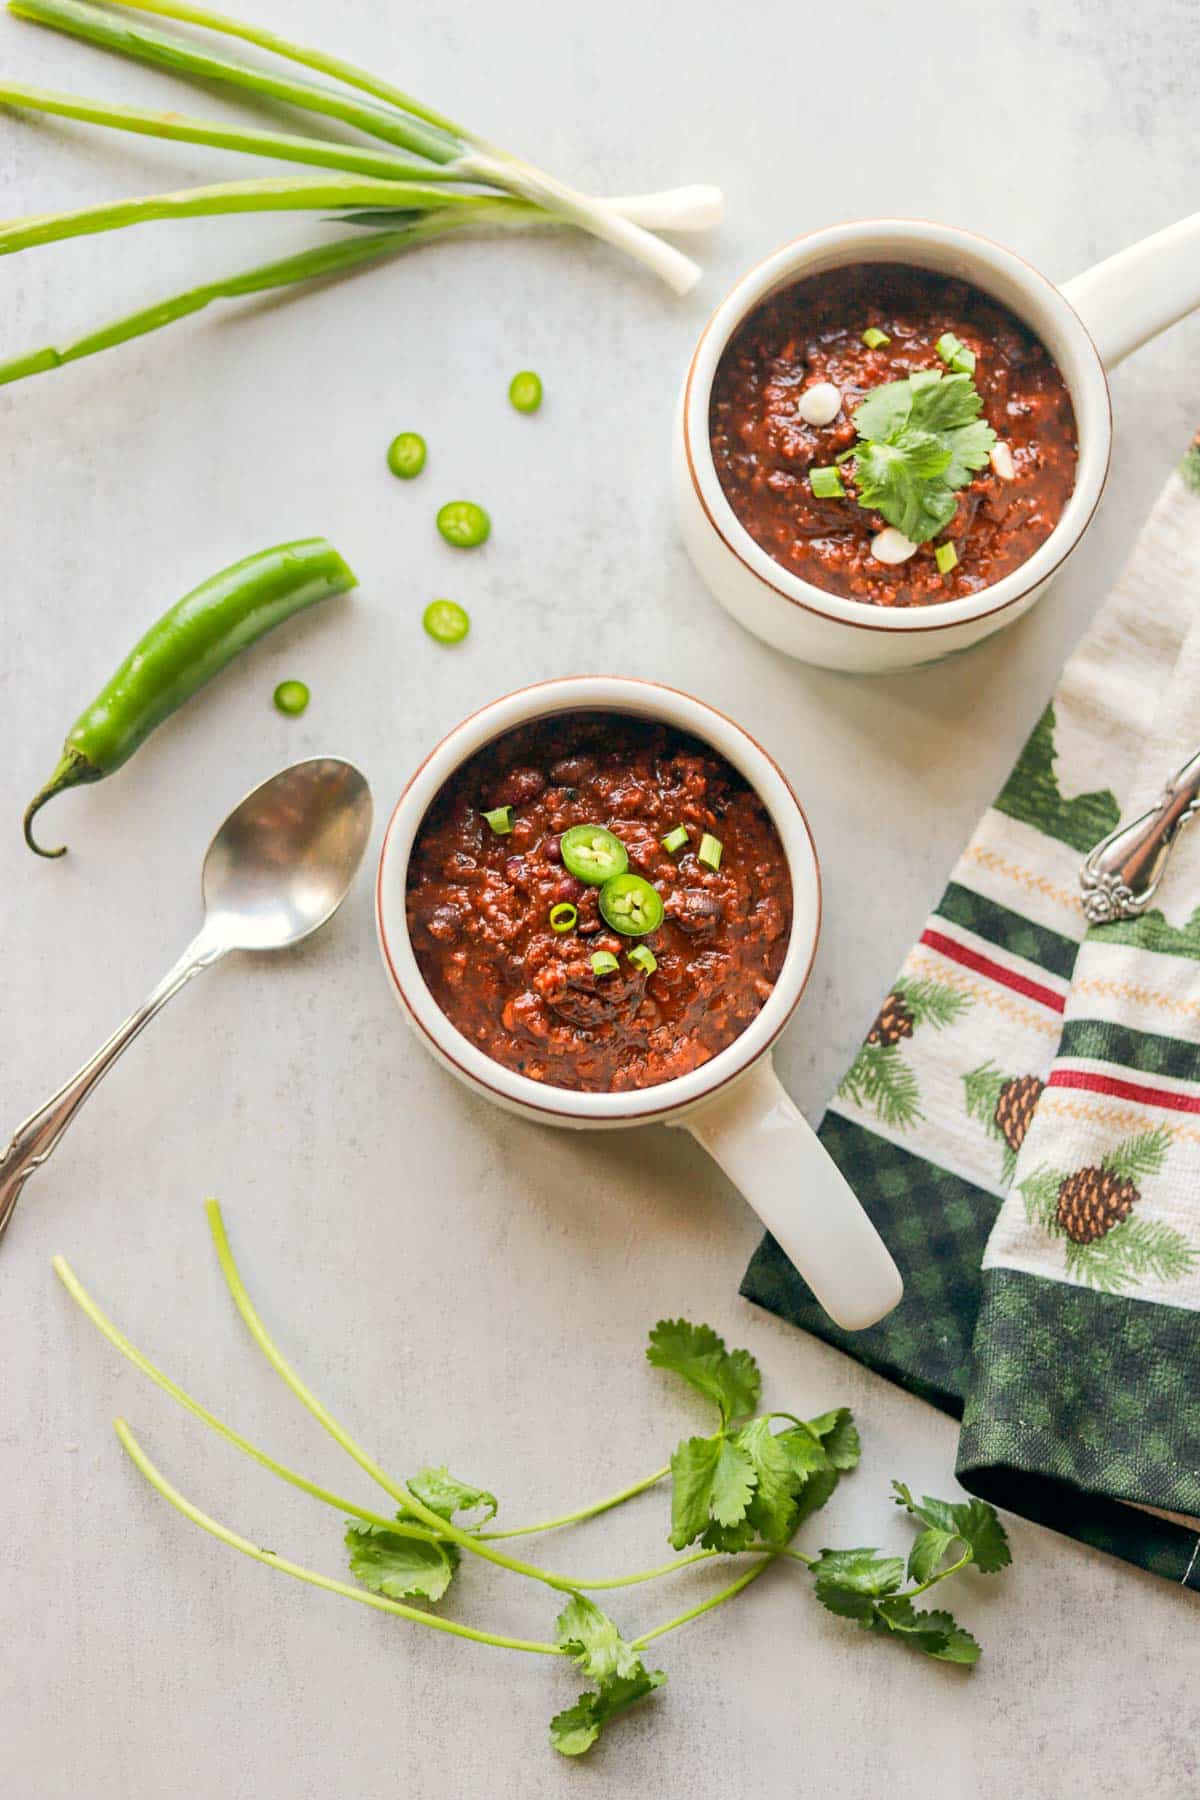 elk chili served in chili bowls with fixings